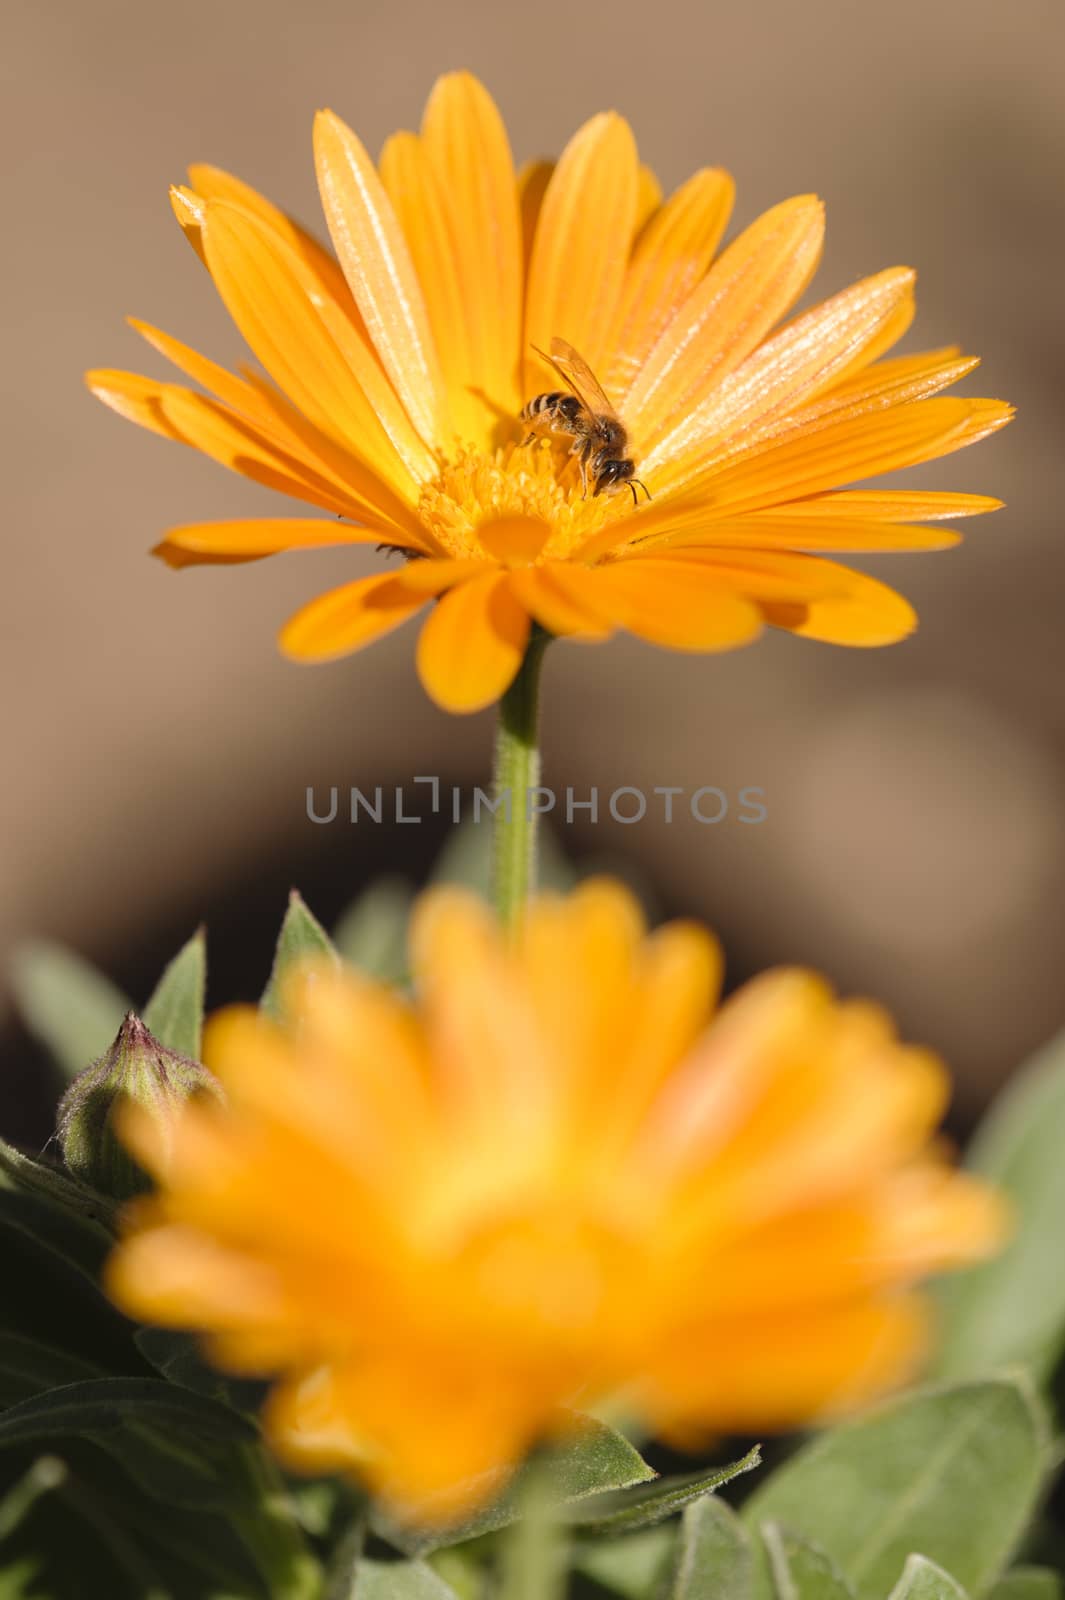 Honey bee collecting nectar and pollen on an orange daisy